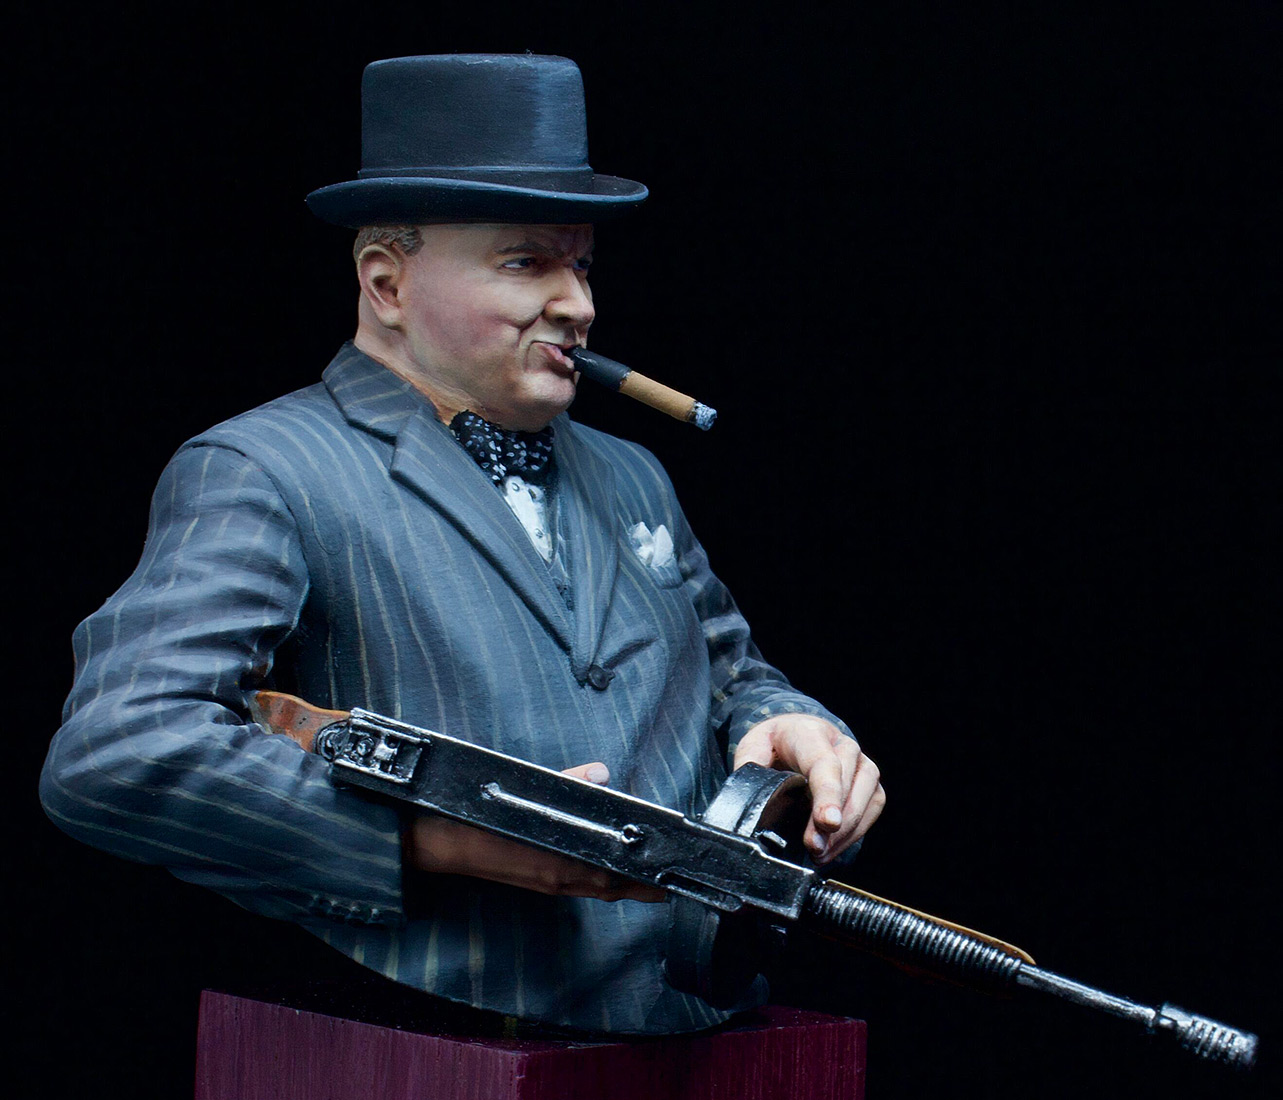 Figures: Winston Churchill with Thompson SMG, 1940, photo #2